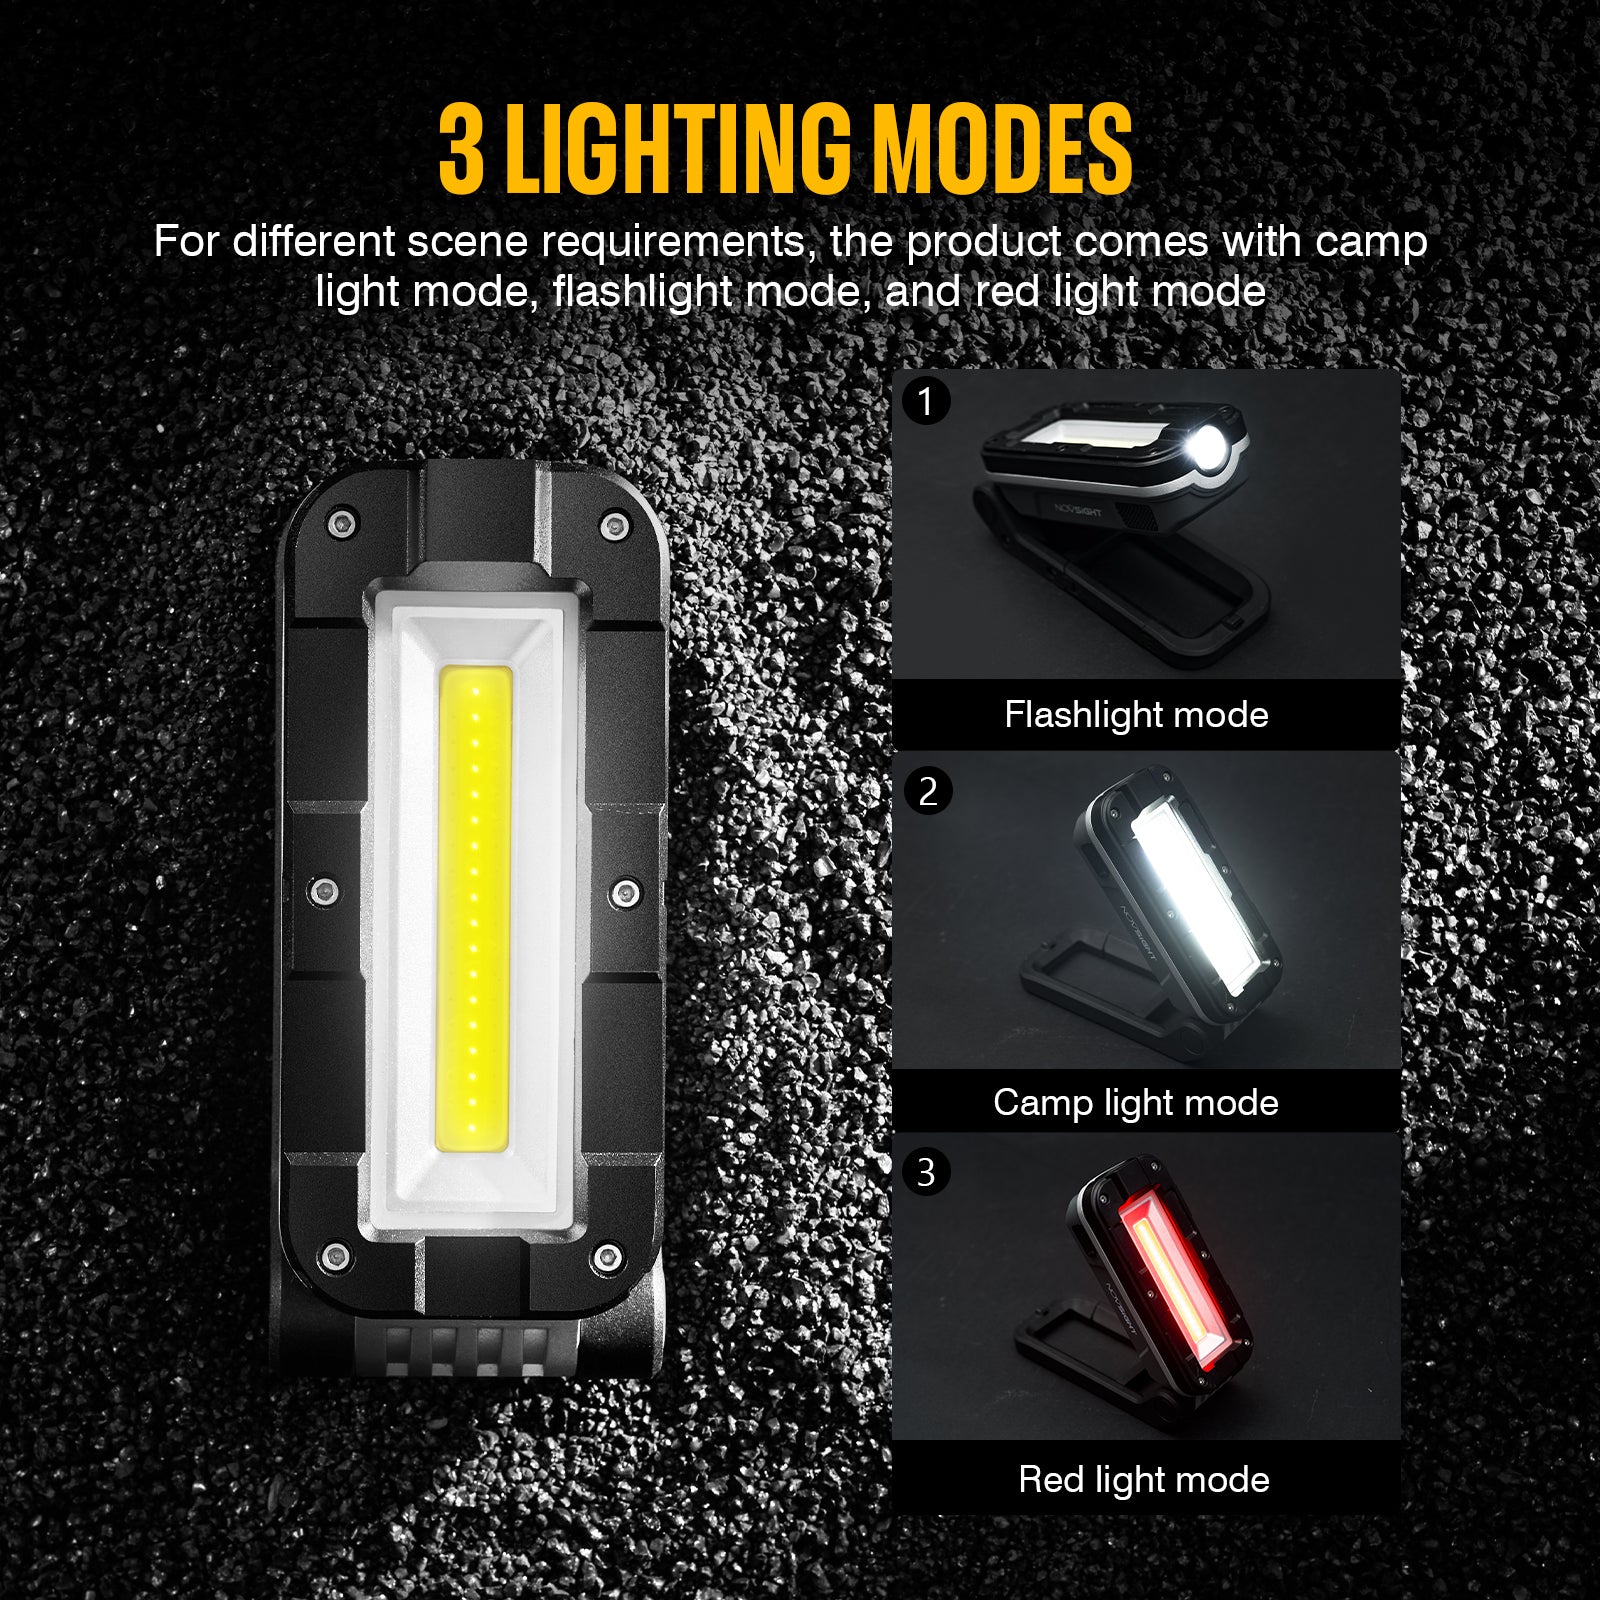 Foldable LED Rechargeable Magnetic Work Light Kit for Outdoor Camping